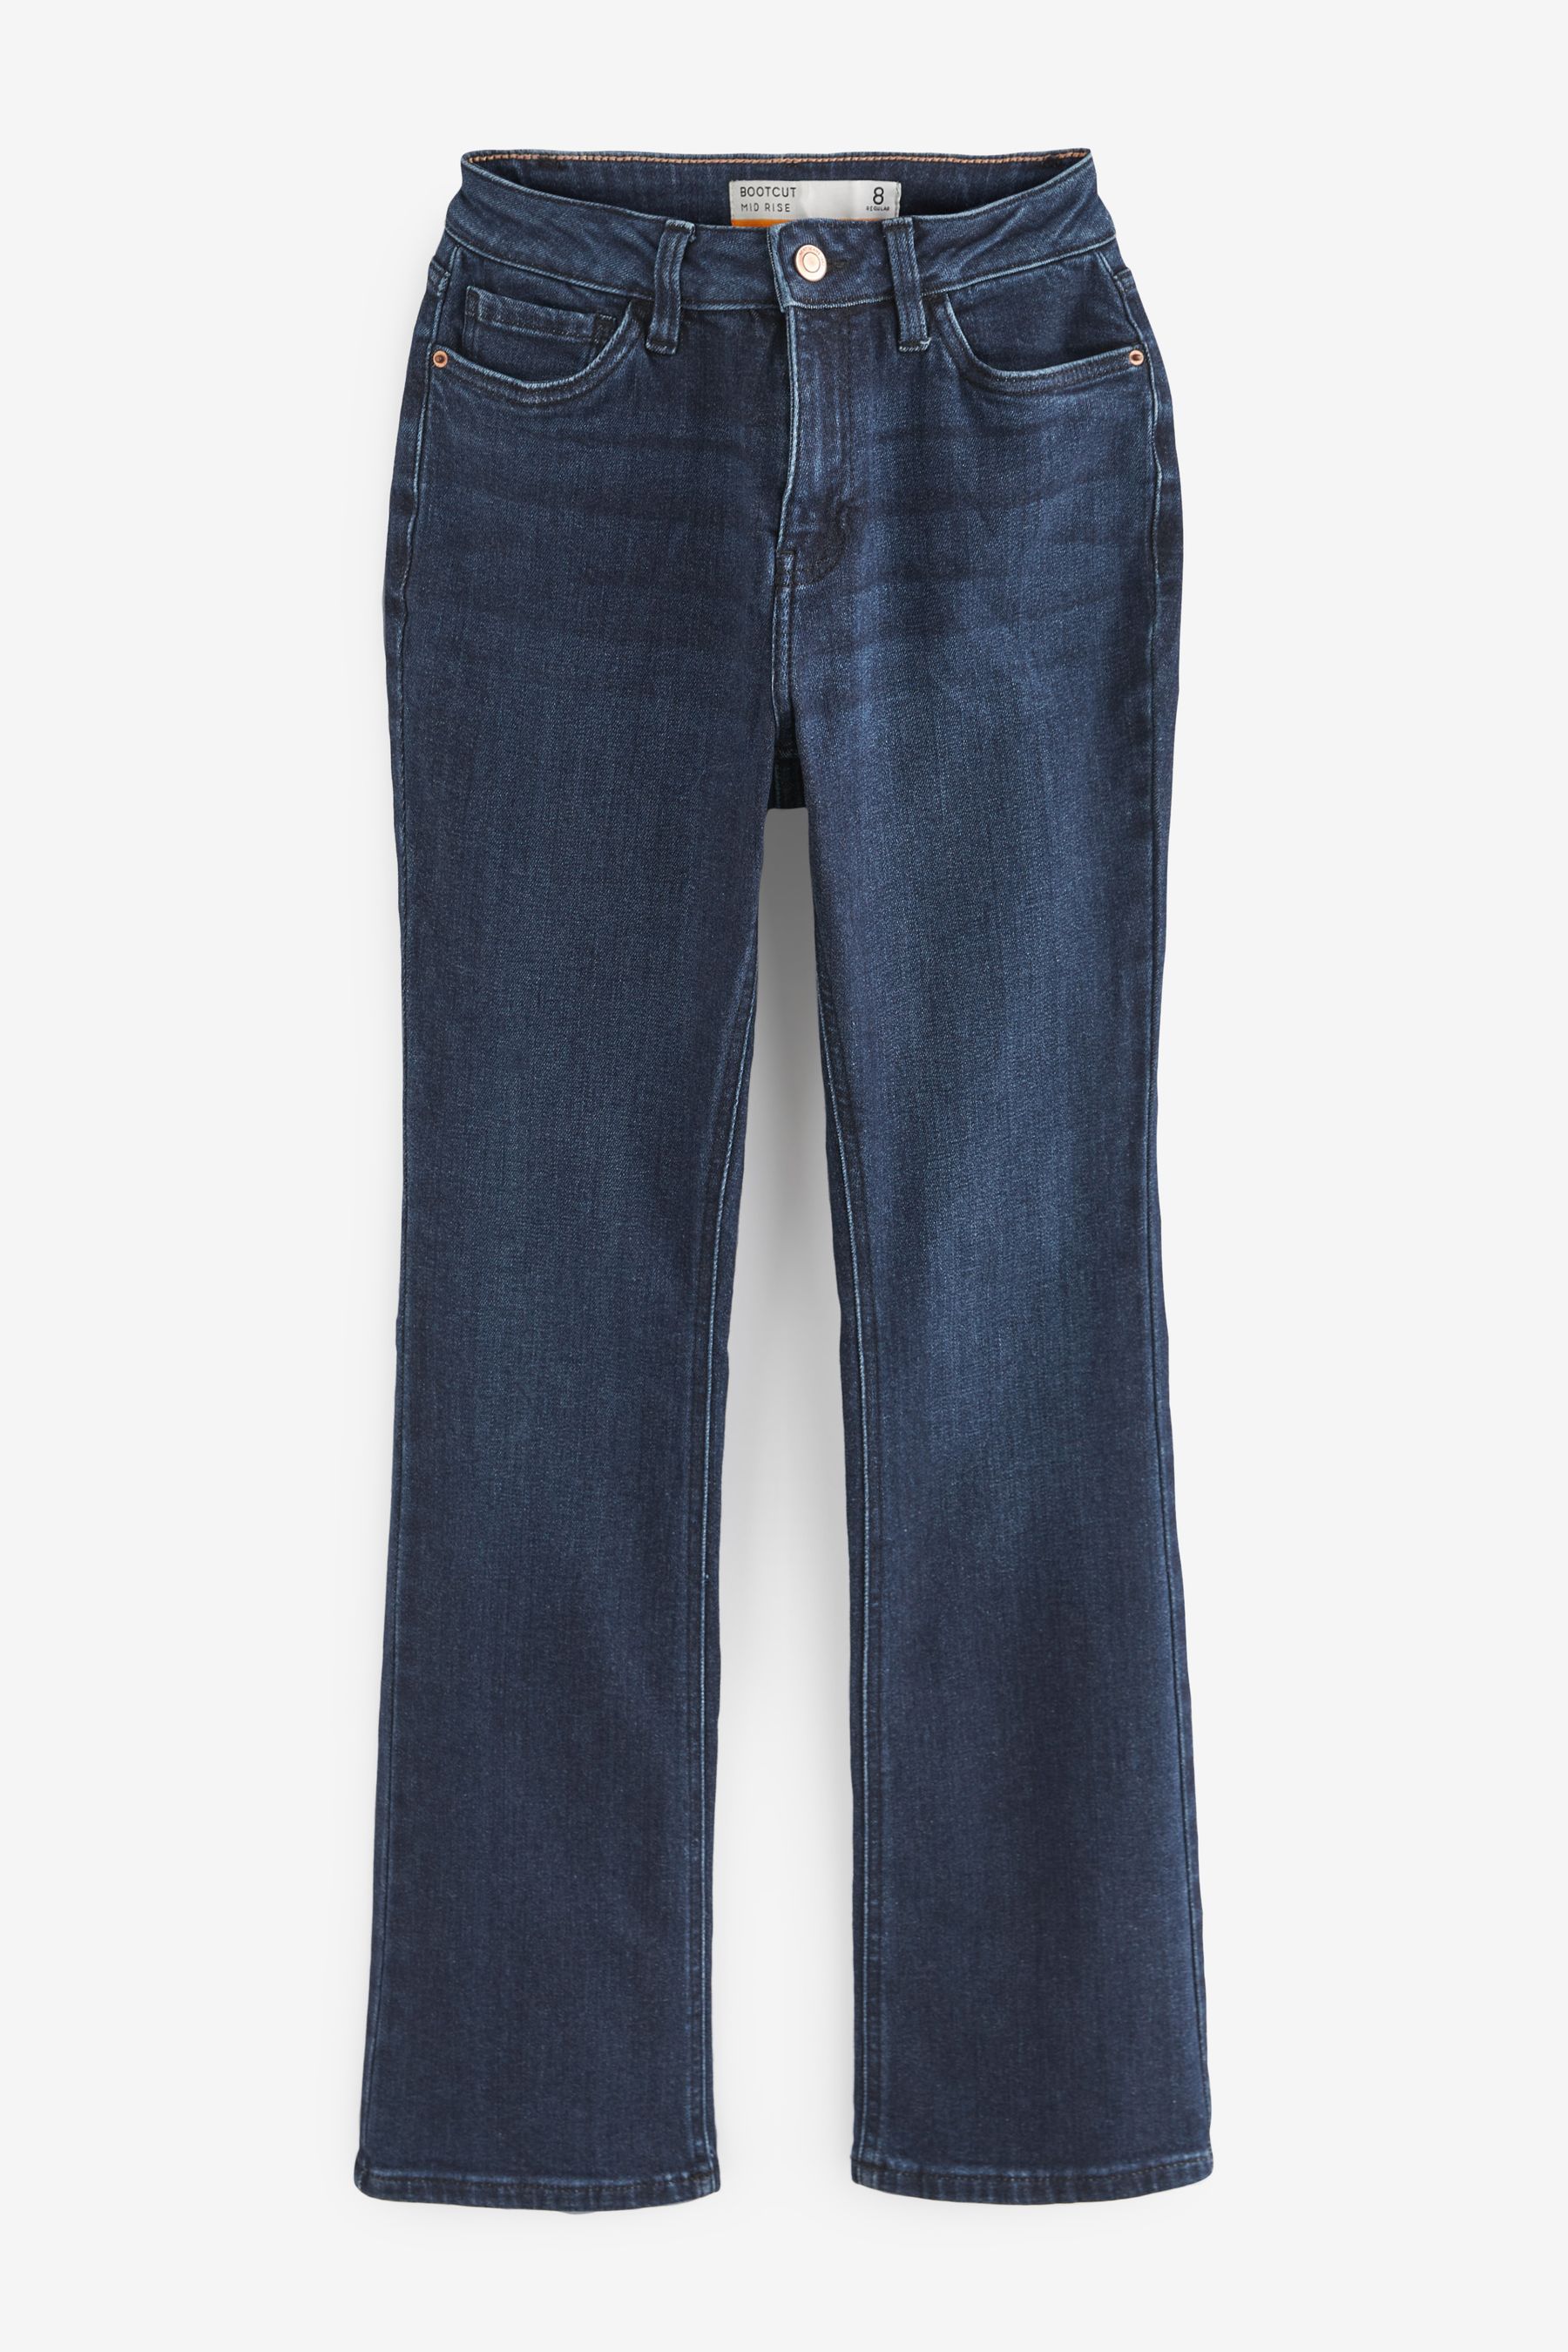 Buy Dark Blue Hourglass Bootcut Jeans from Next Ireland